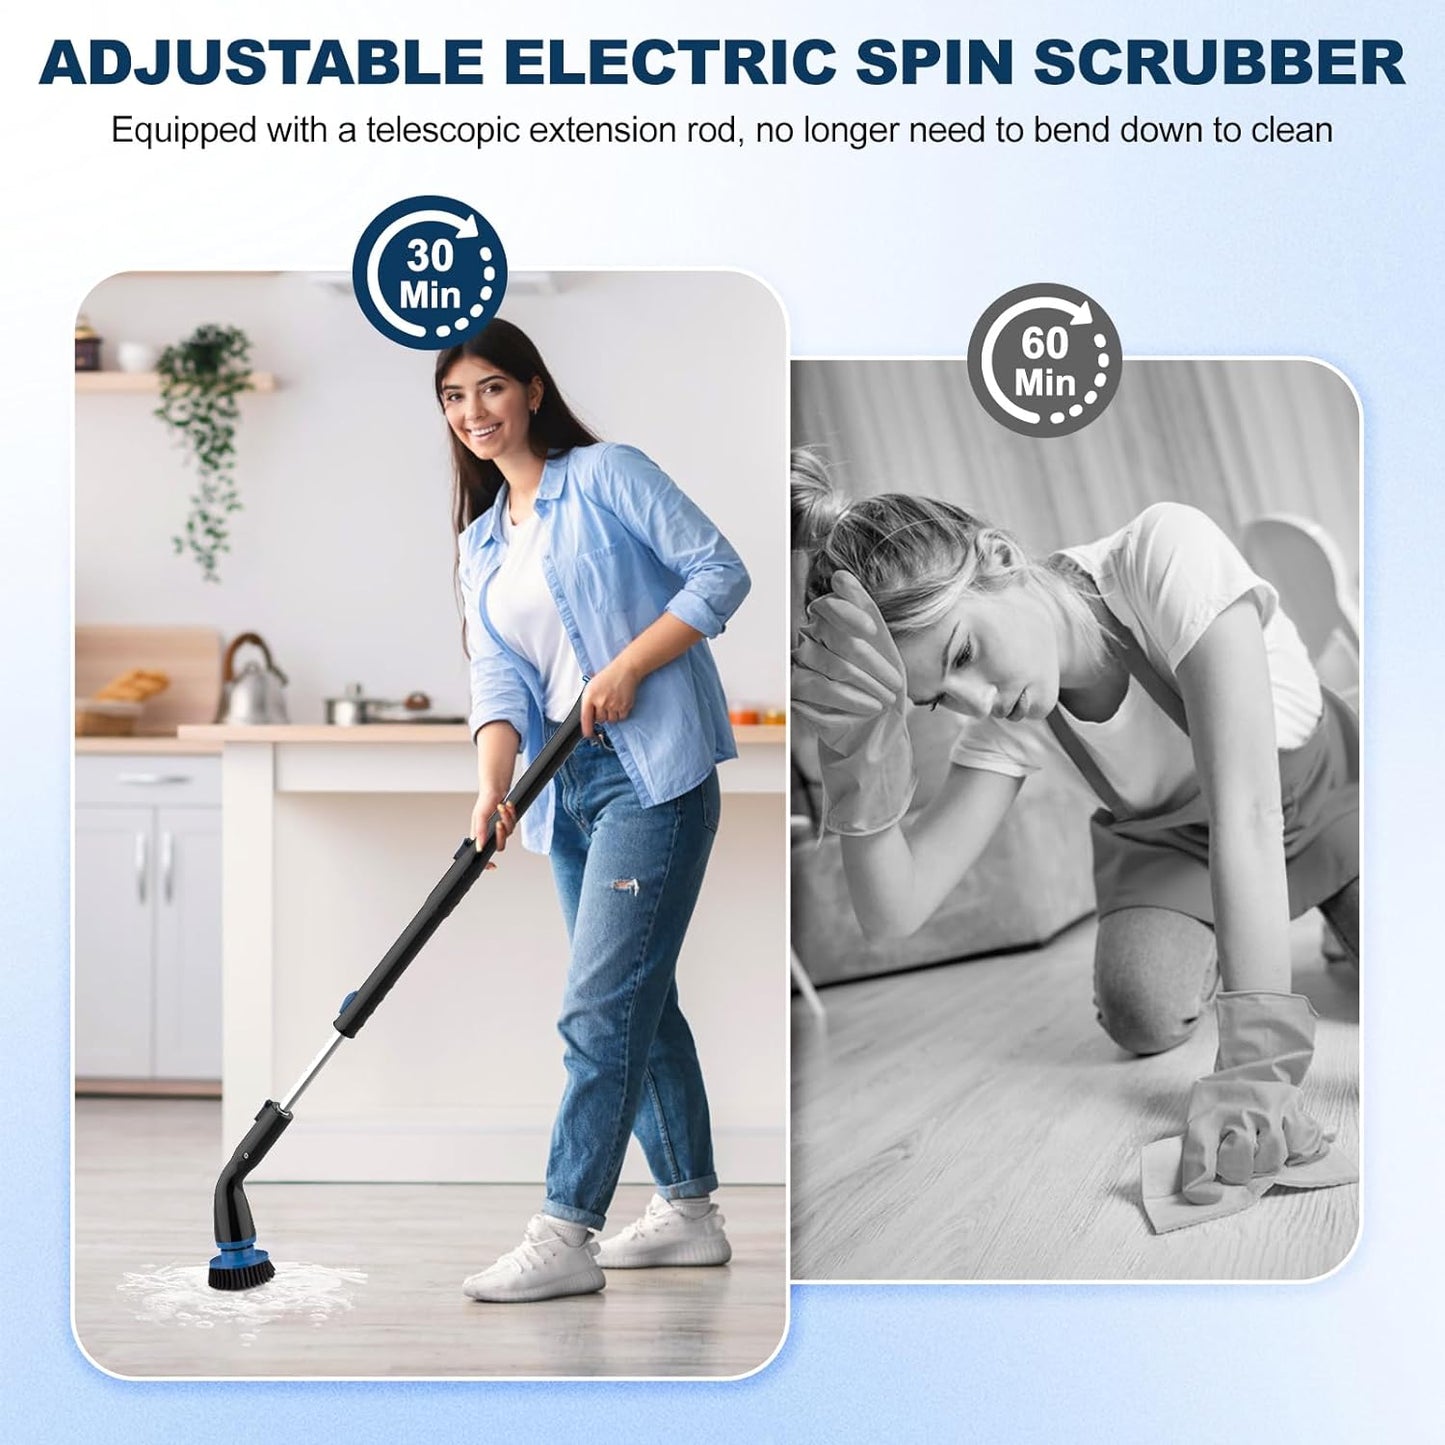 Electric Spin Scrubber, Cordless Cleaning Brush With 4 Replaceable Brush Heads And Adjustable Extension Handle Power Shower Scrubber For Bathroom, Kitchen, Tub, Tile, Floor.